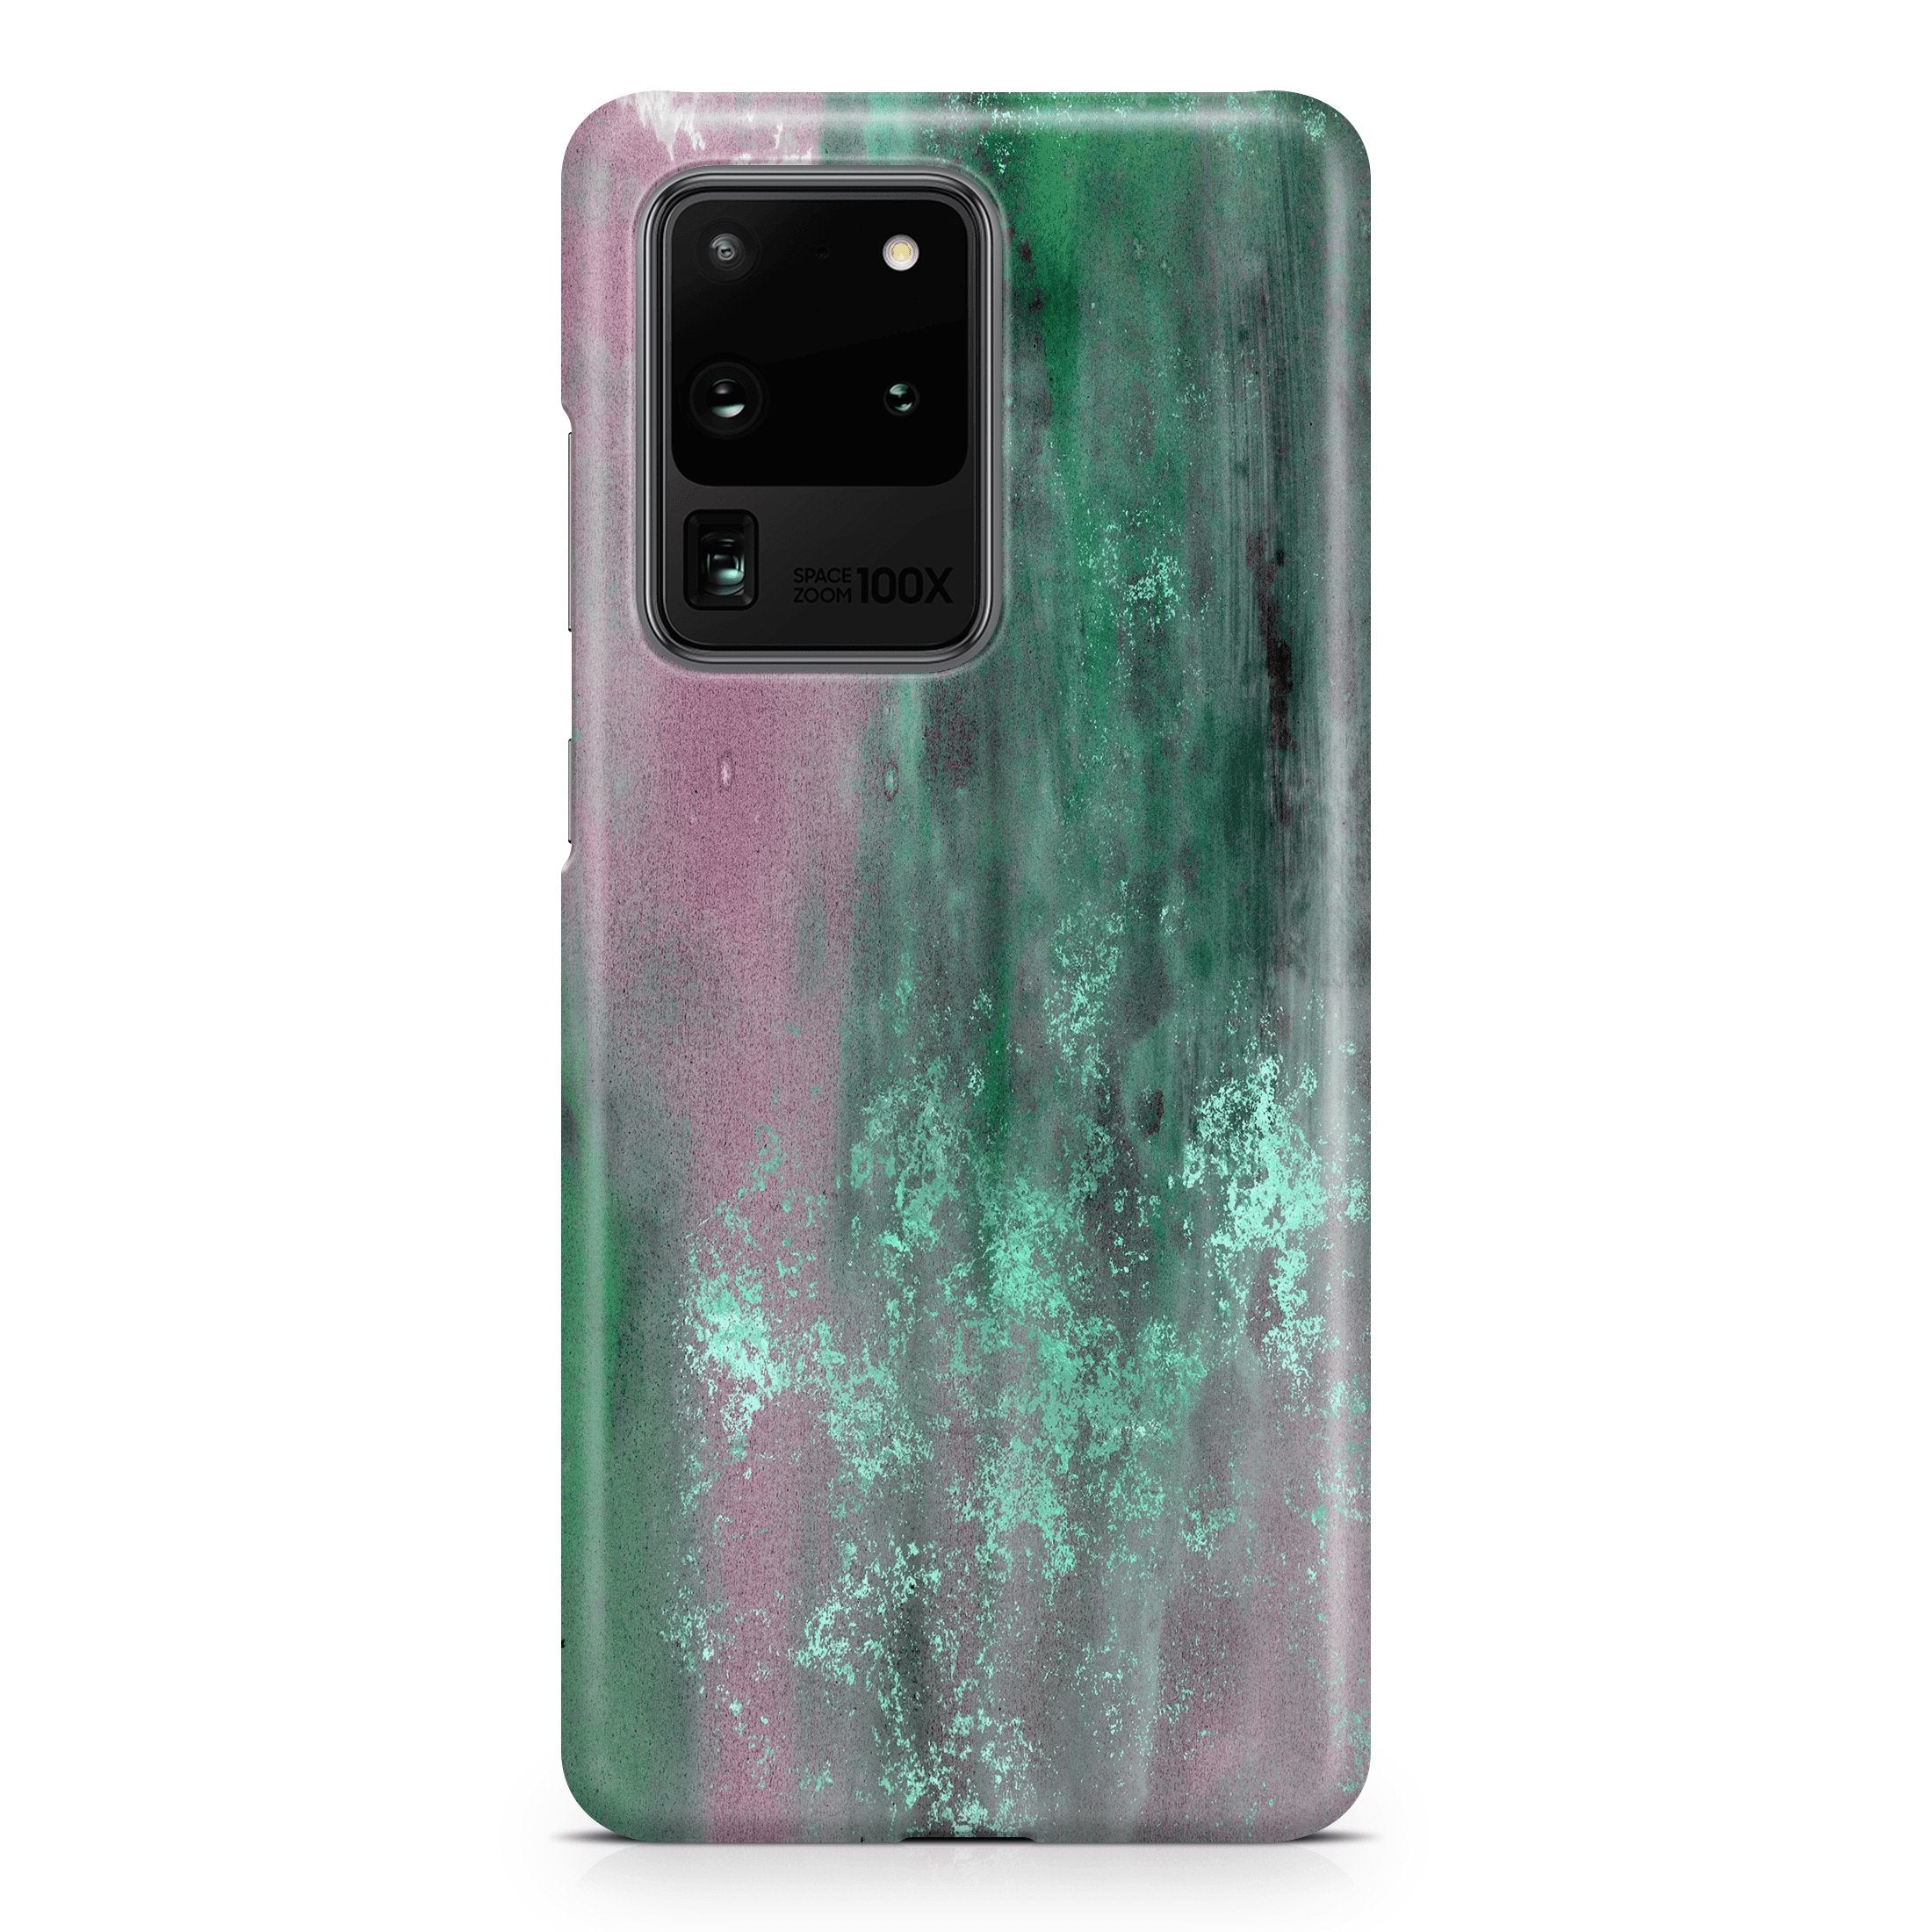 Rustic Emerald II - Samsung phone case designs by CaseSwagger